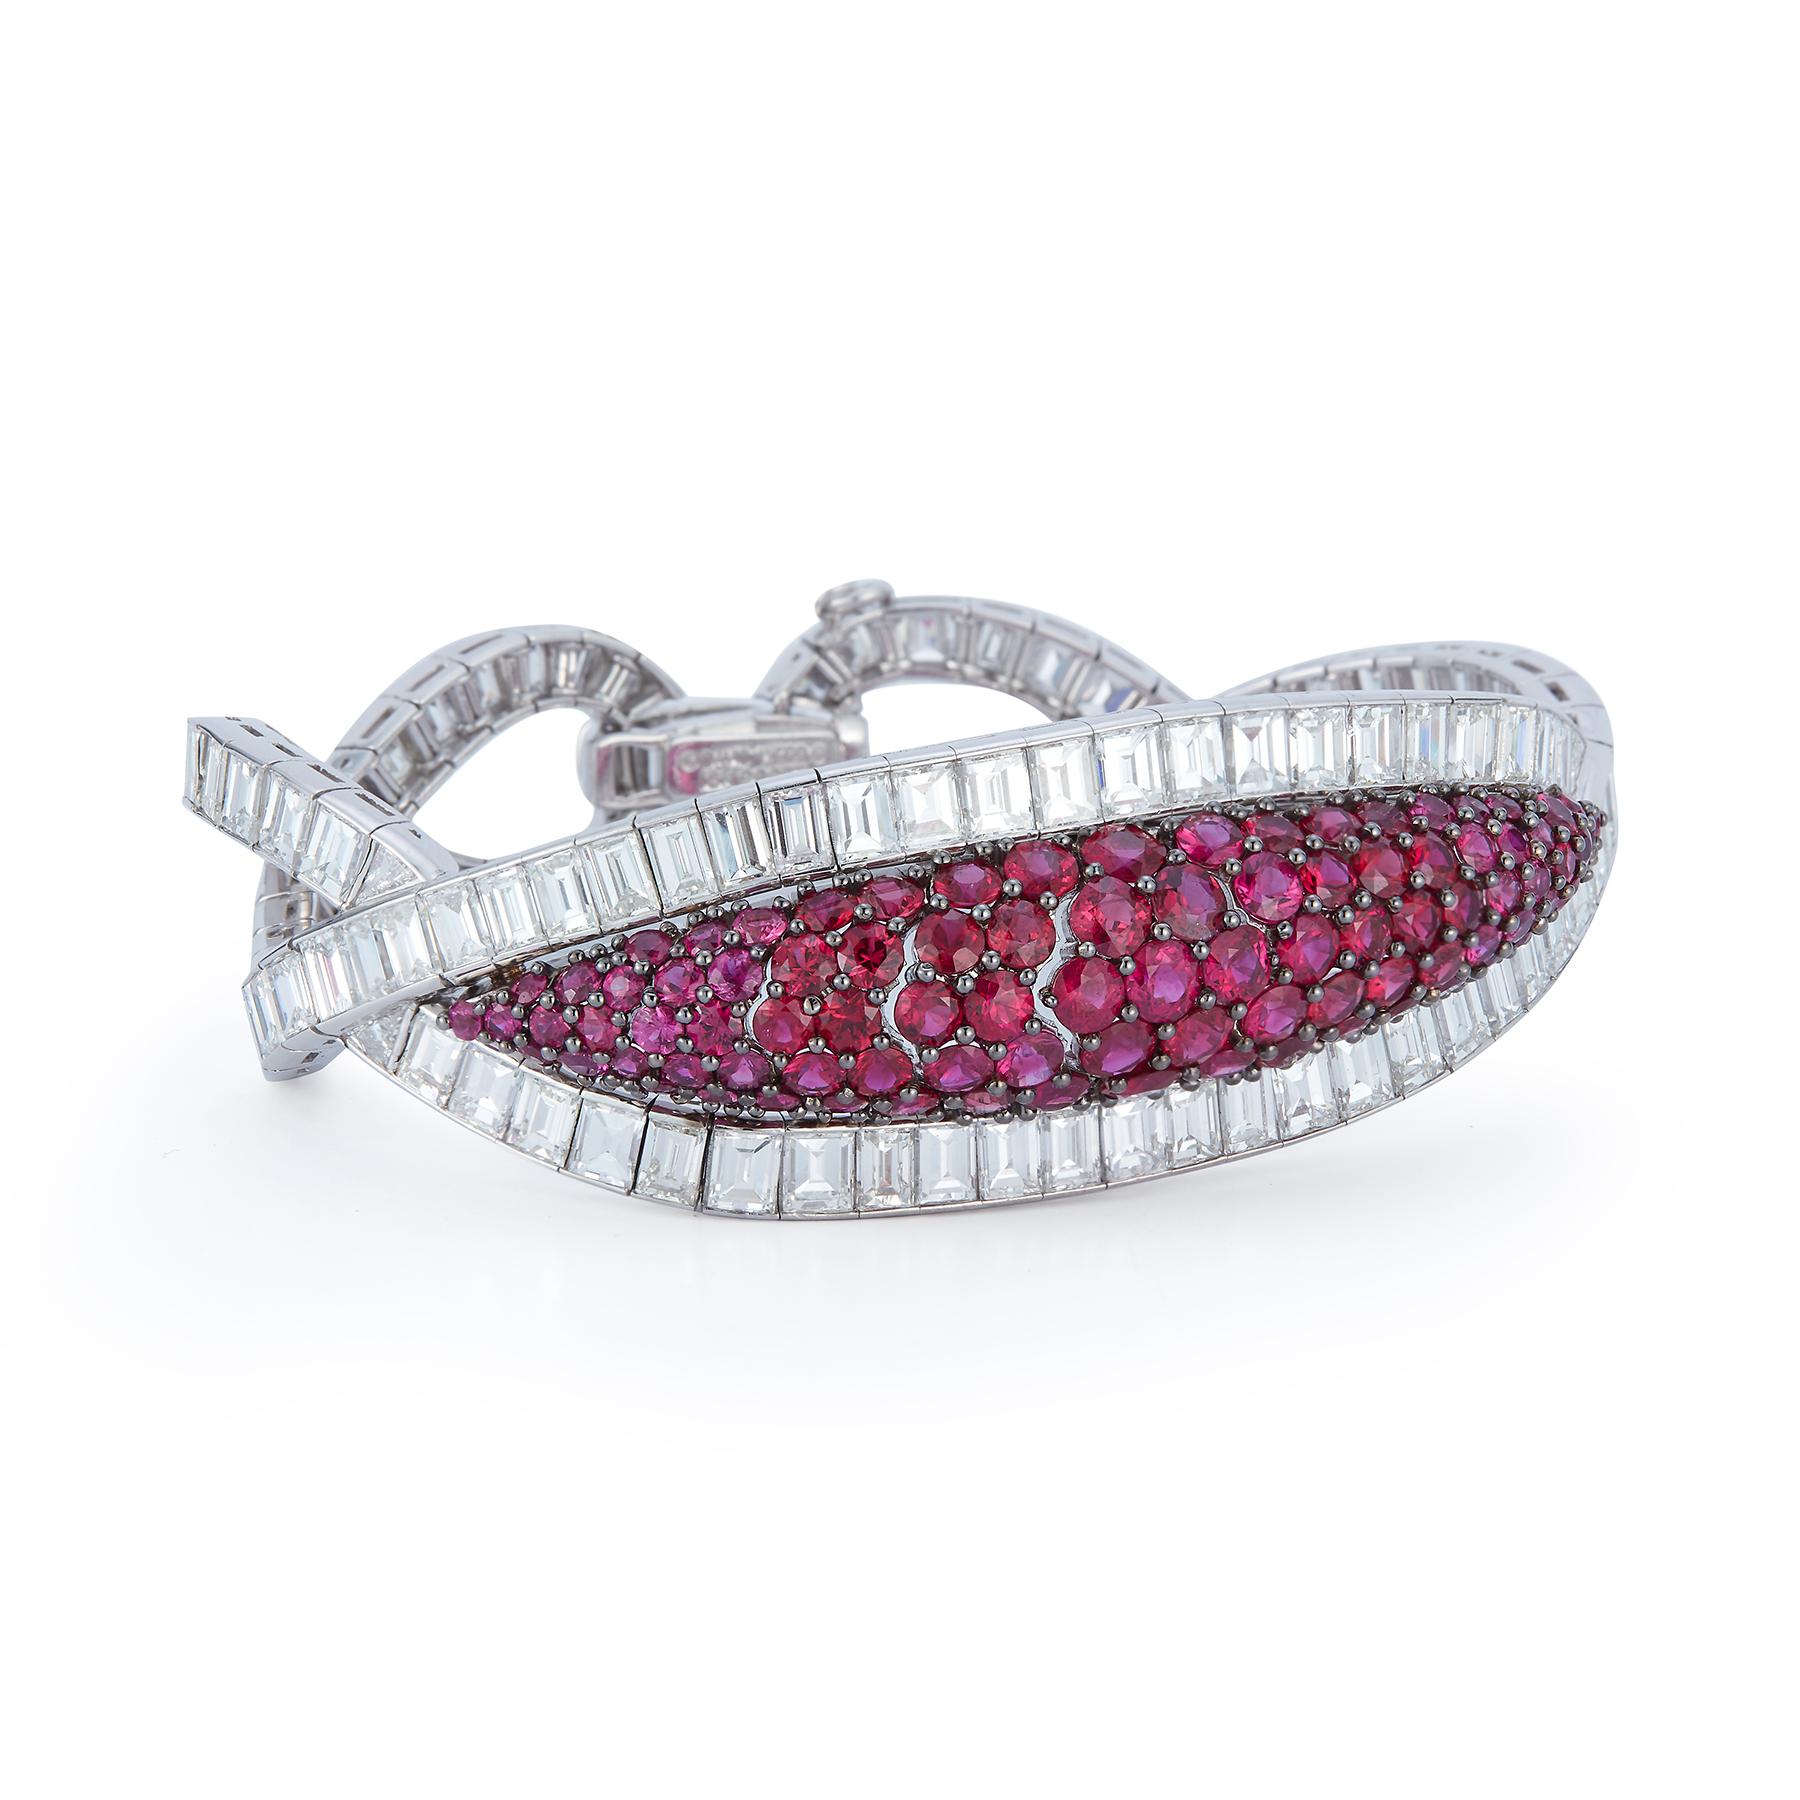 Magnificent Ruby and Diamond Bracelet by David Webb

A extremely fine vintage ruby and diamond bracelet made by David Webb

Set with approximately 45 carats of very fine colorless diamonds and pave set rubies in the center.

Made circa 1970

With